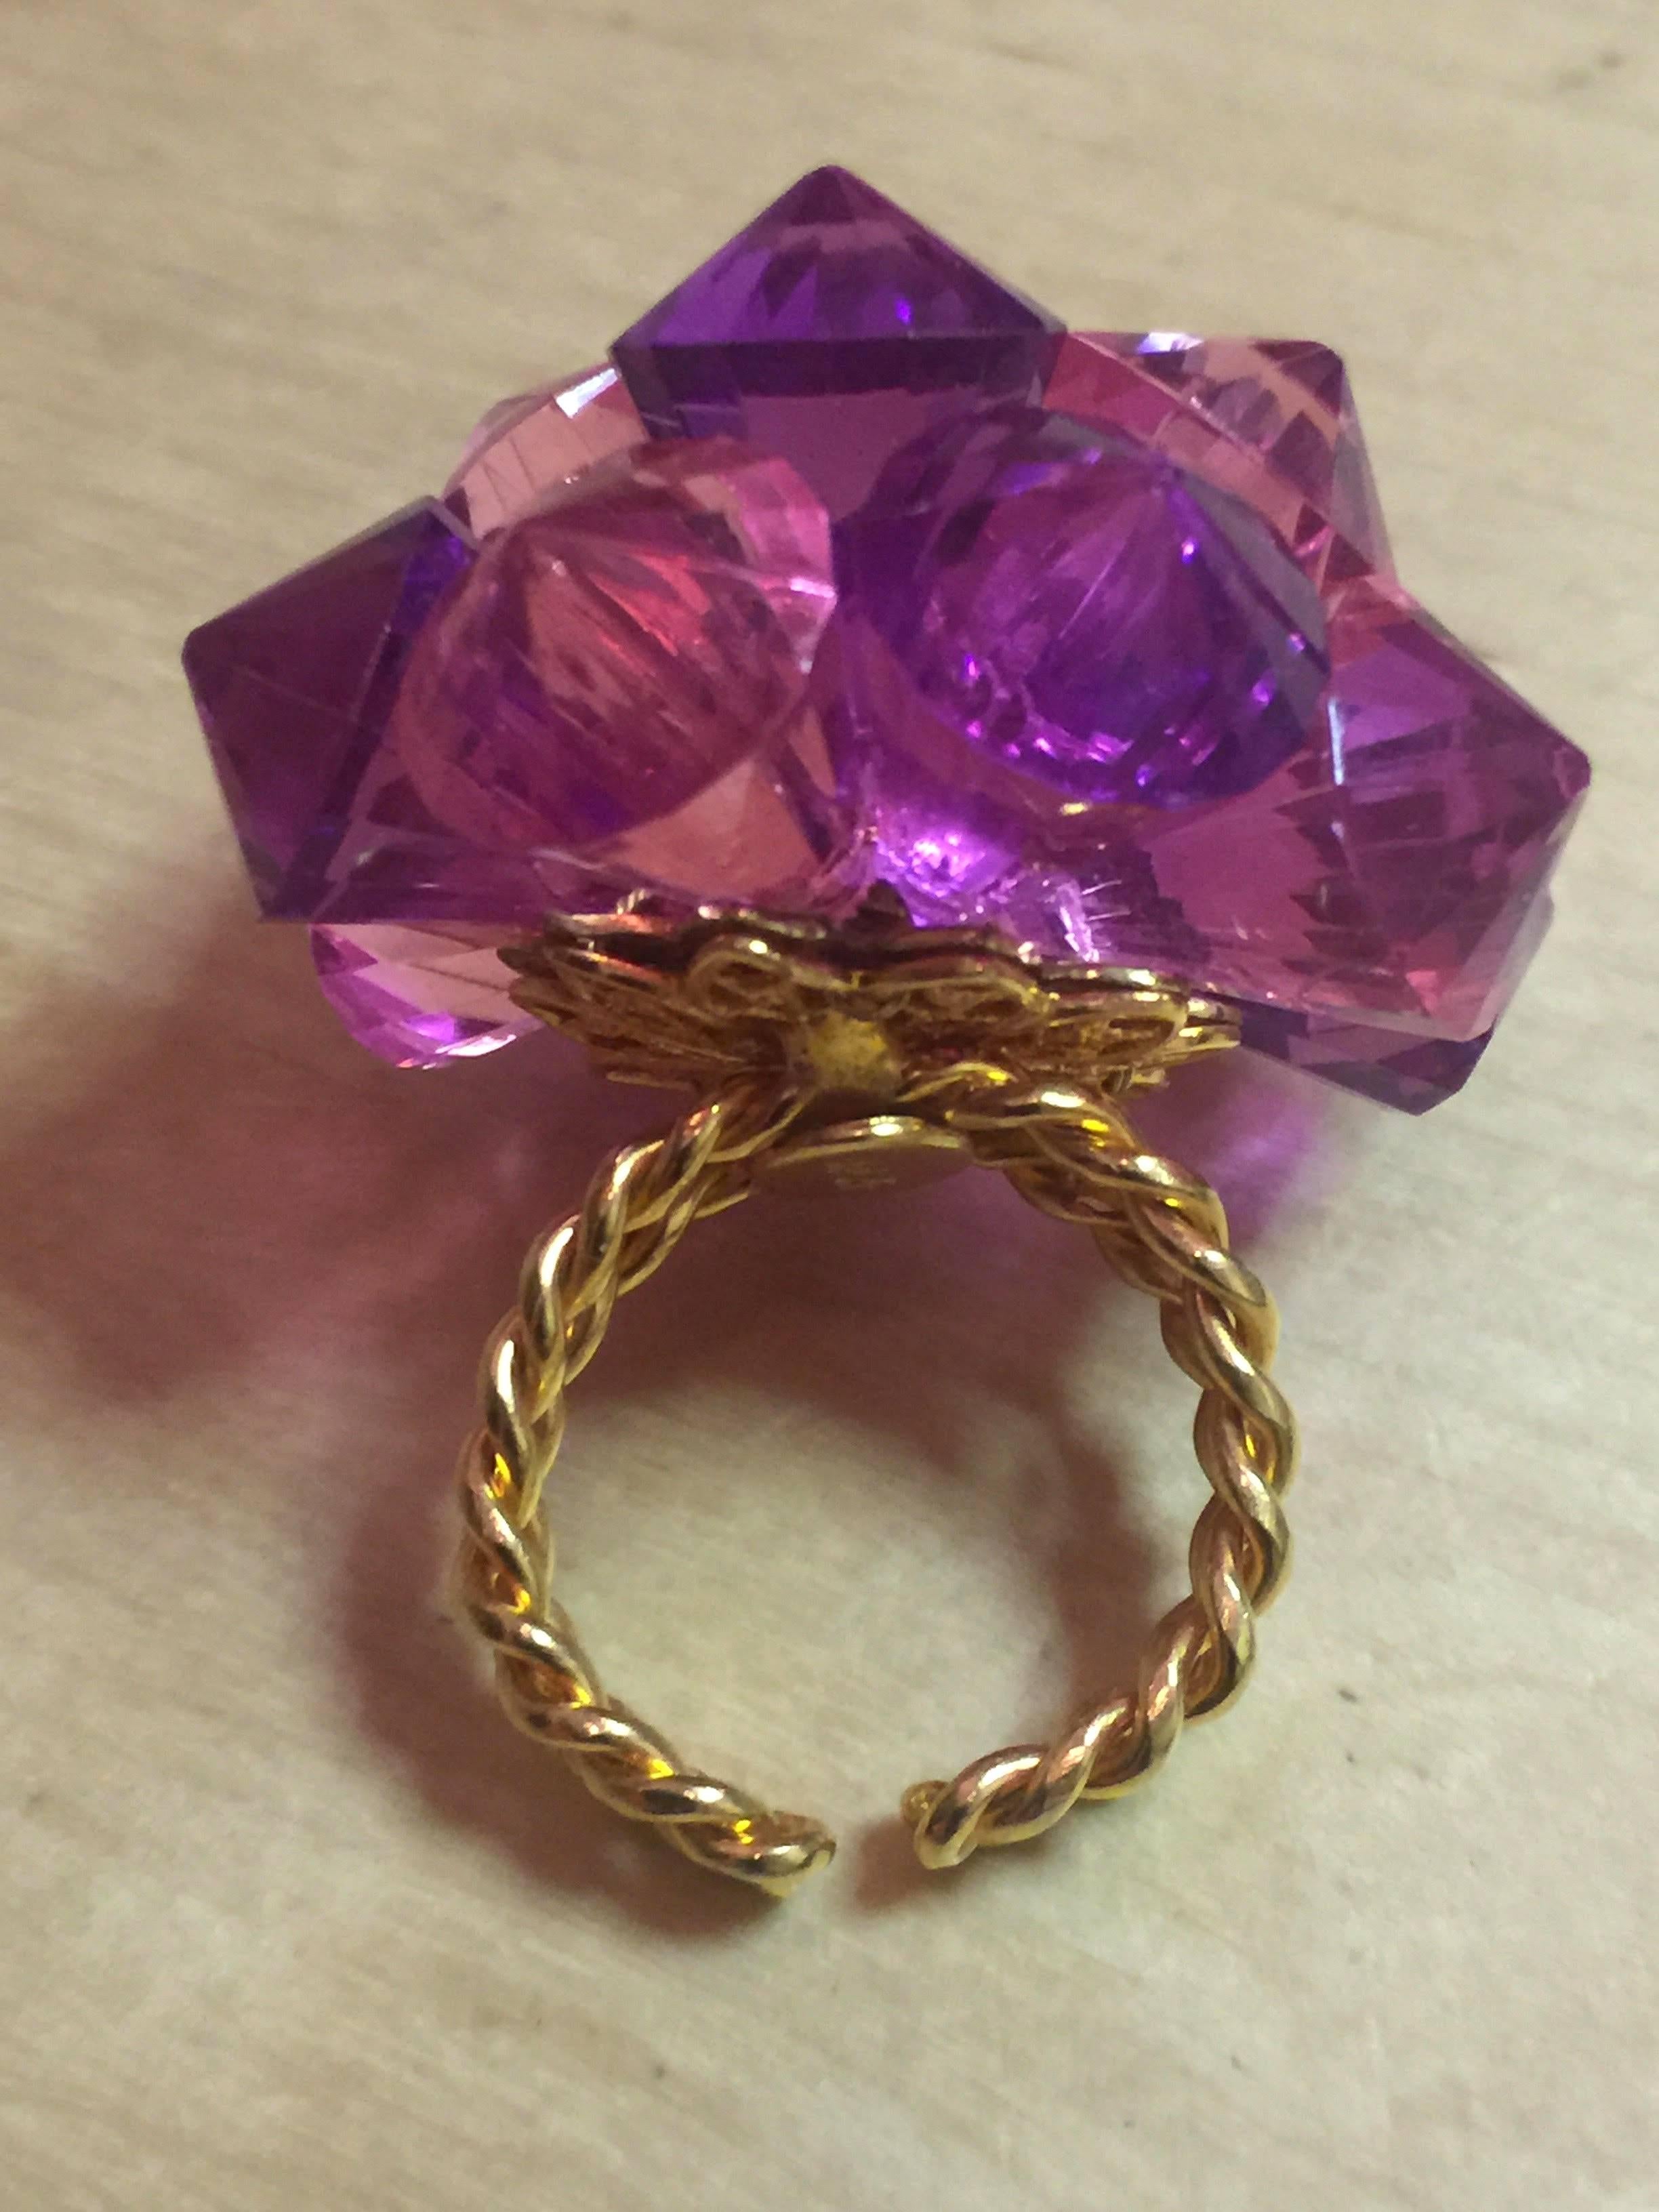 Always fun, always fashionable, this 1970s William DeLillo Pink Purple Acrylic Adjustable Size Fabulous RING makes quite the POP statement. 12 diamond tipped faceted crystals in acrylic wired together alternating pink and purple tones make for a